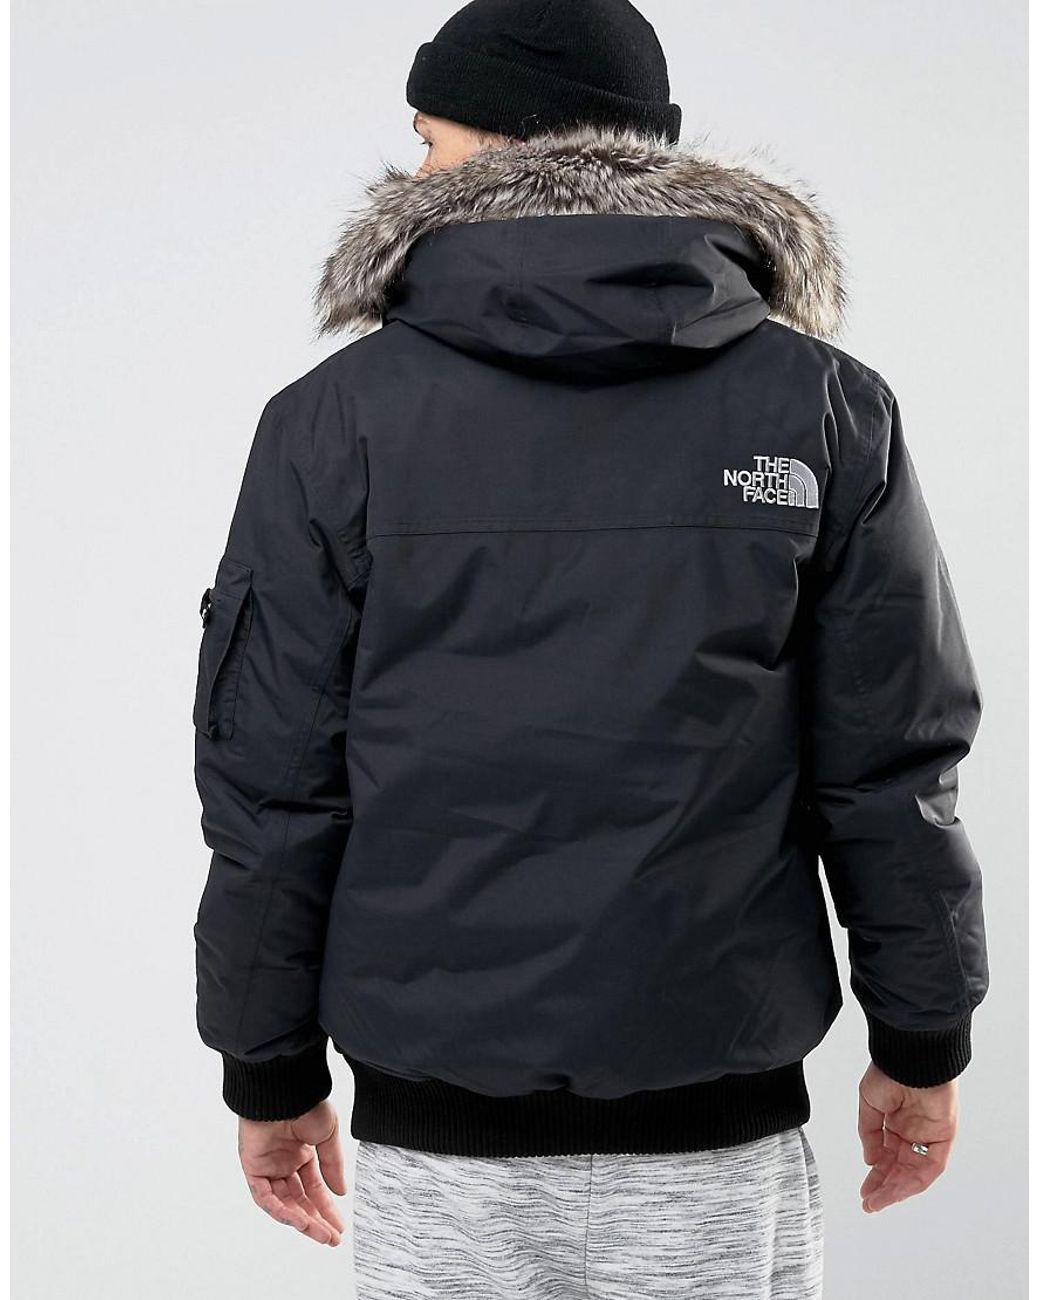 The North Face Gotham Bomber Jacket With Detachable Faux Fur Hood In Black  for Men | Lyst